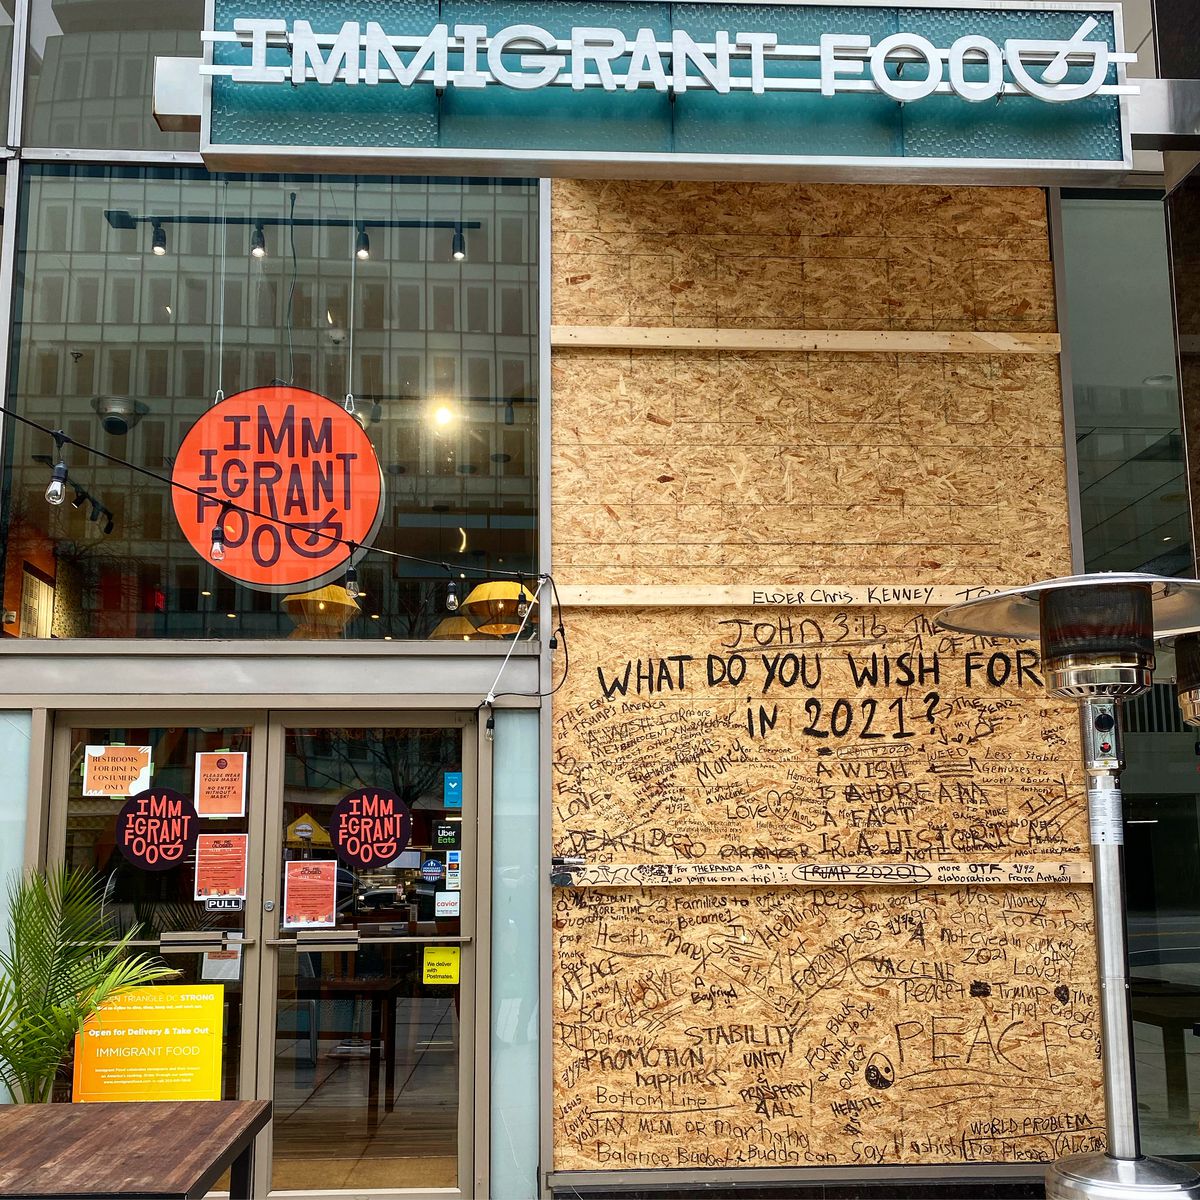 Fast-casual spot Immigrant Food turned its boarded-up windows into a “Wish Wall” for 2021.